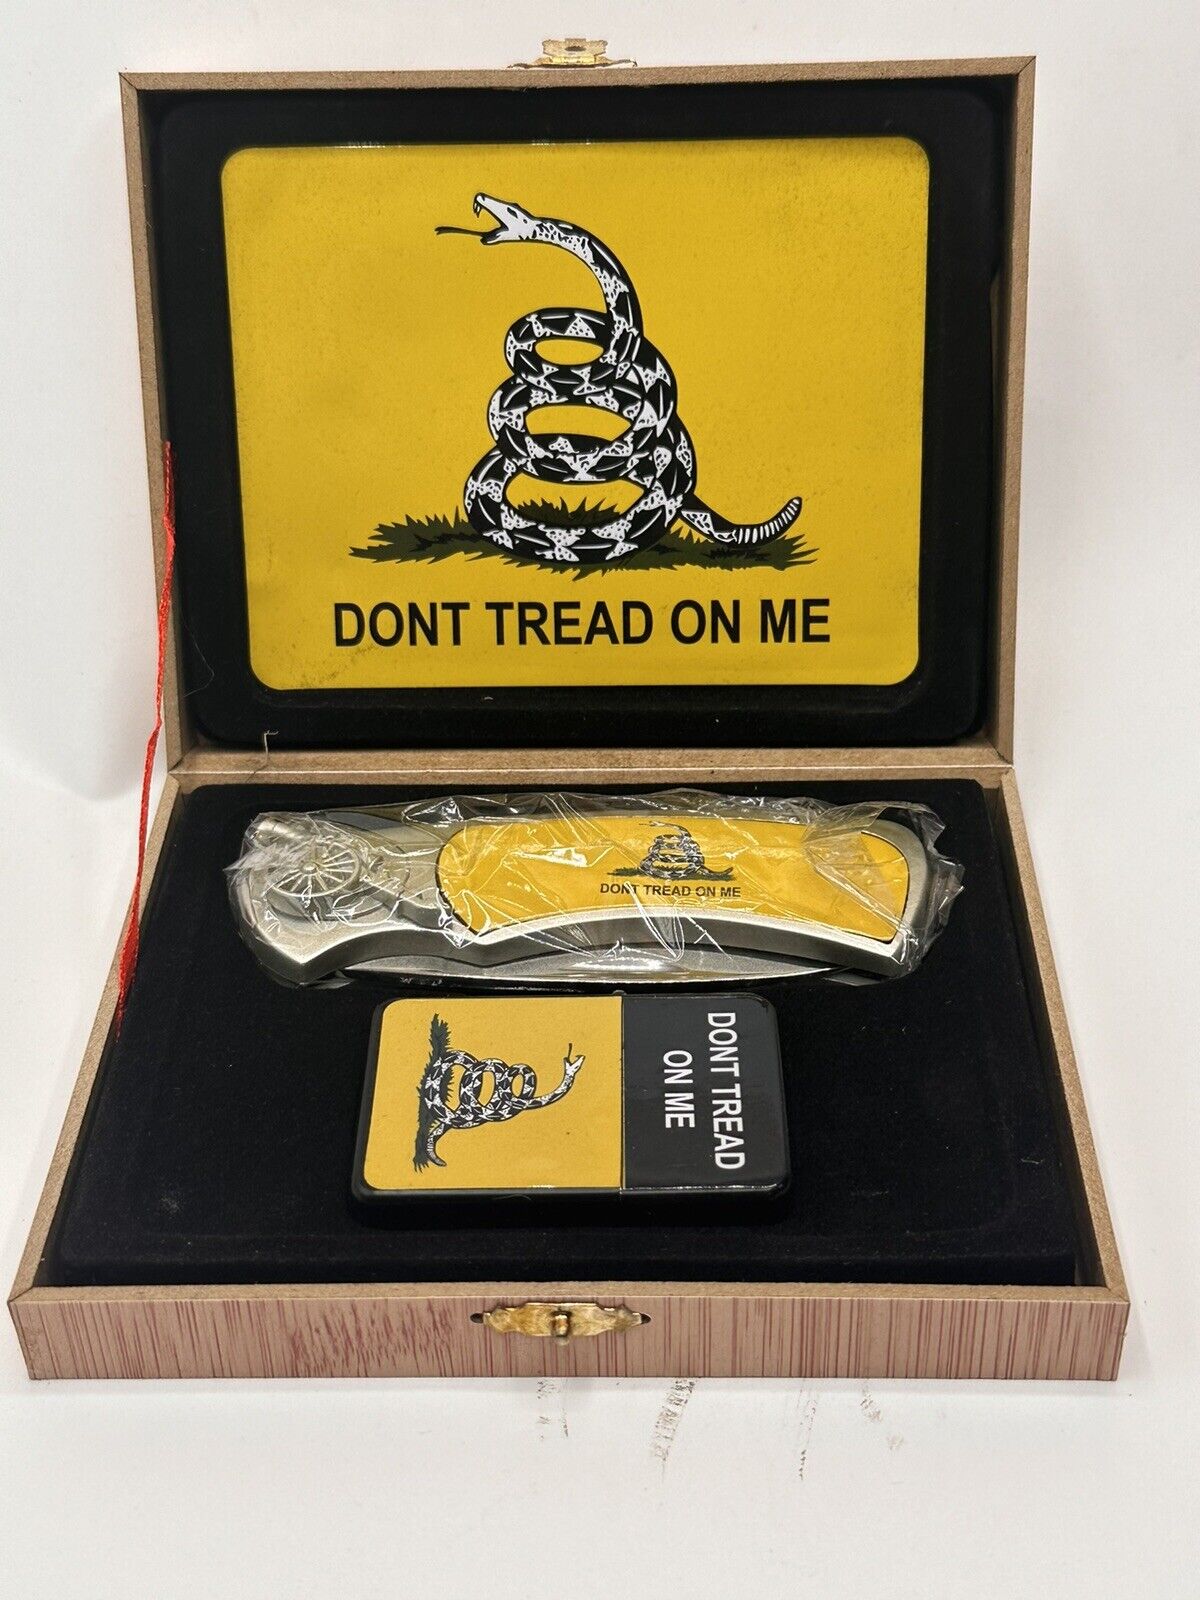 New Don’t Tread on Me Gadsden Lighter & Knife Set in Box SAME DAY SHIPPING